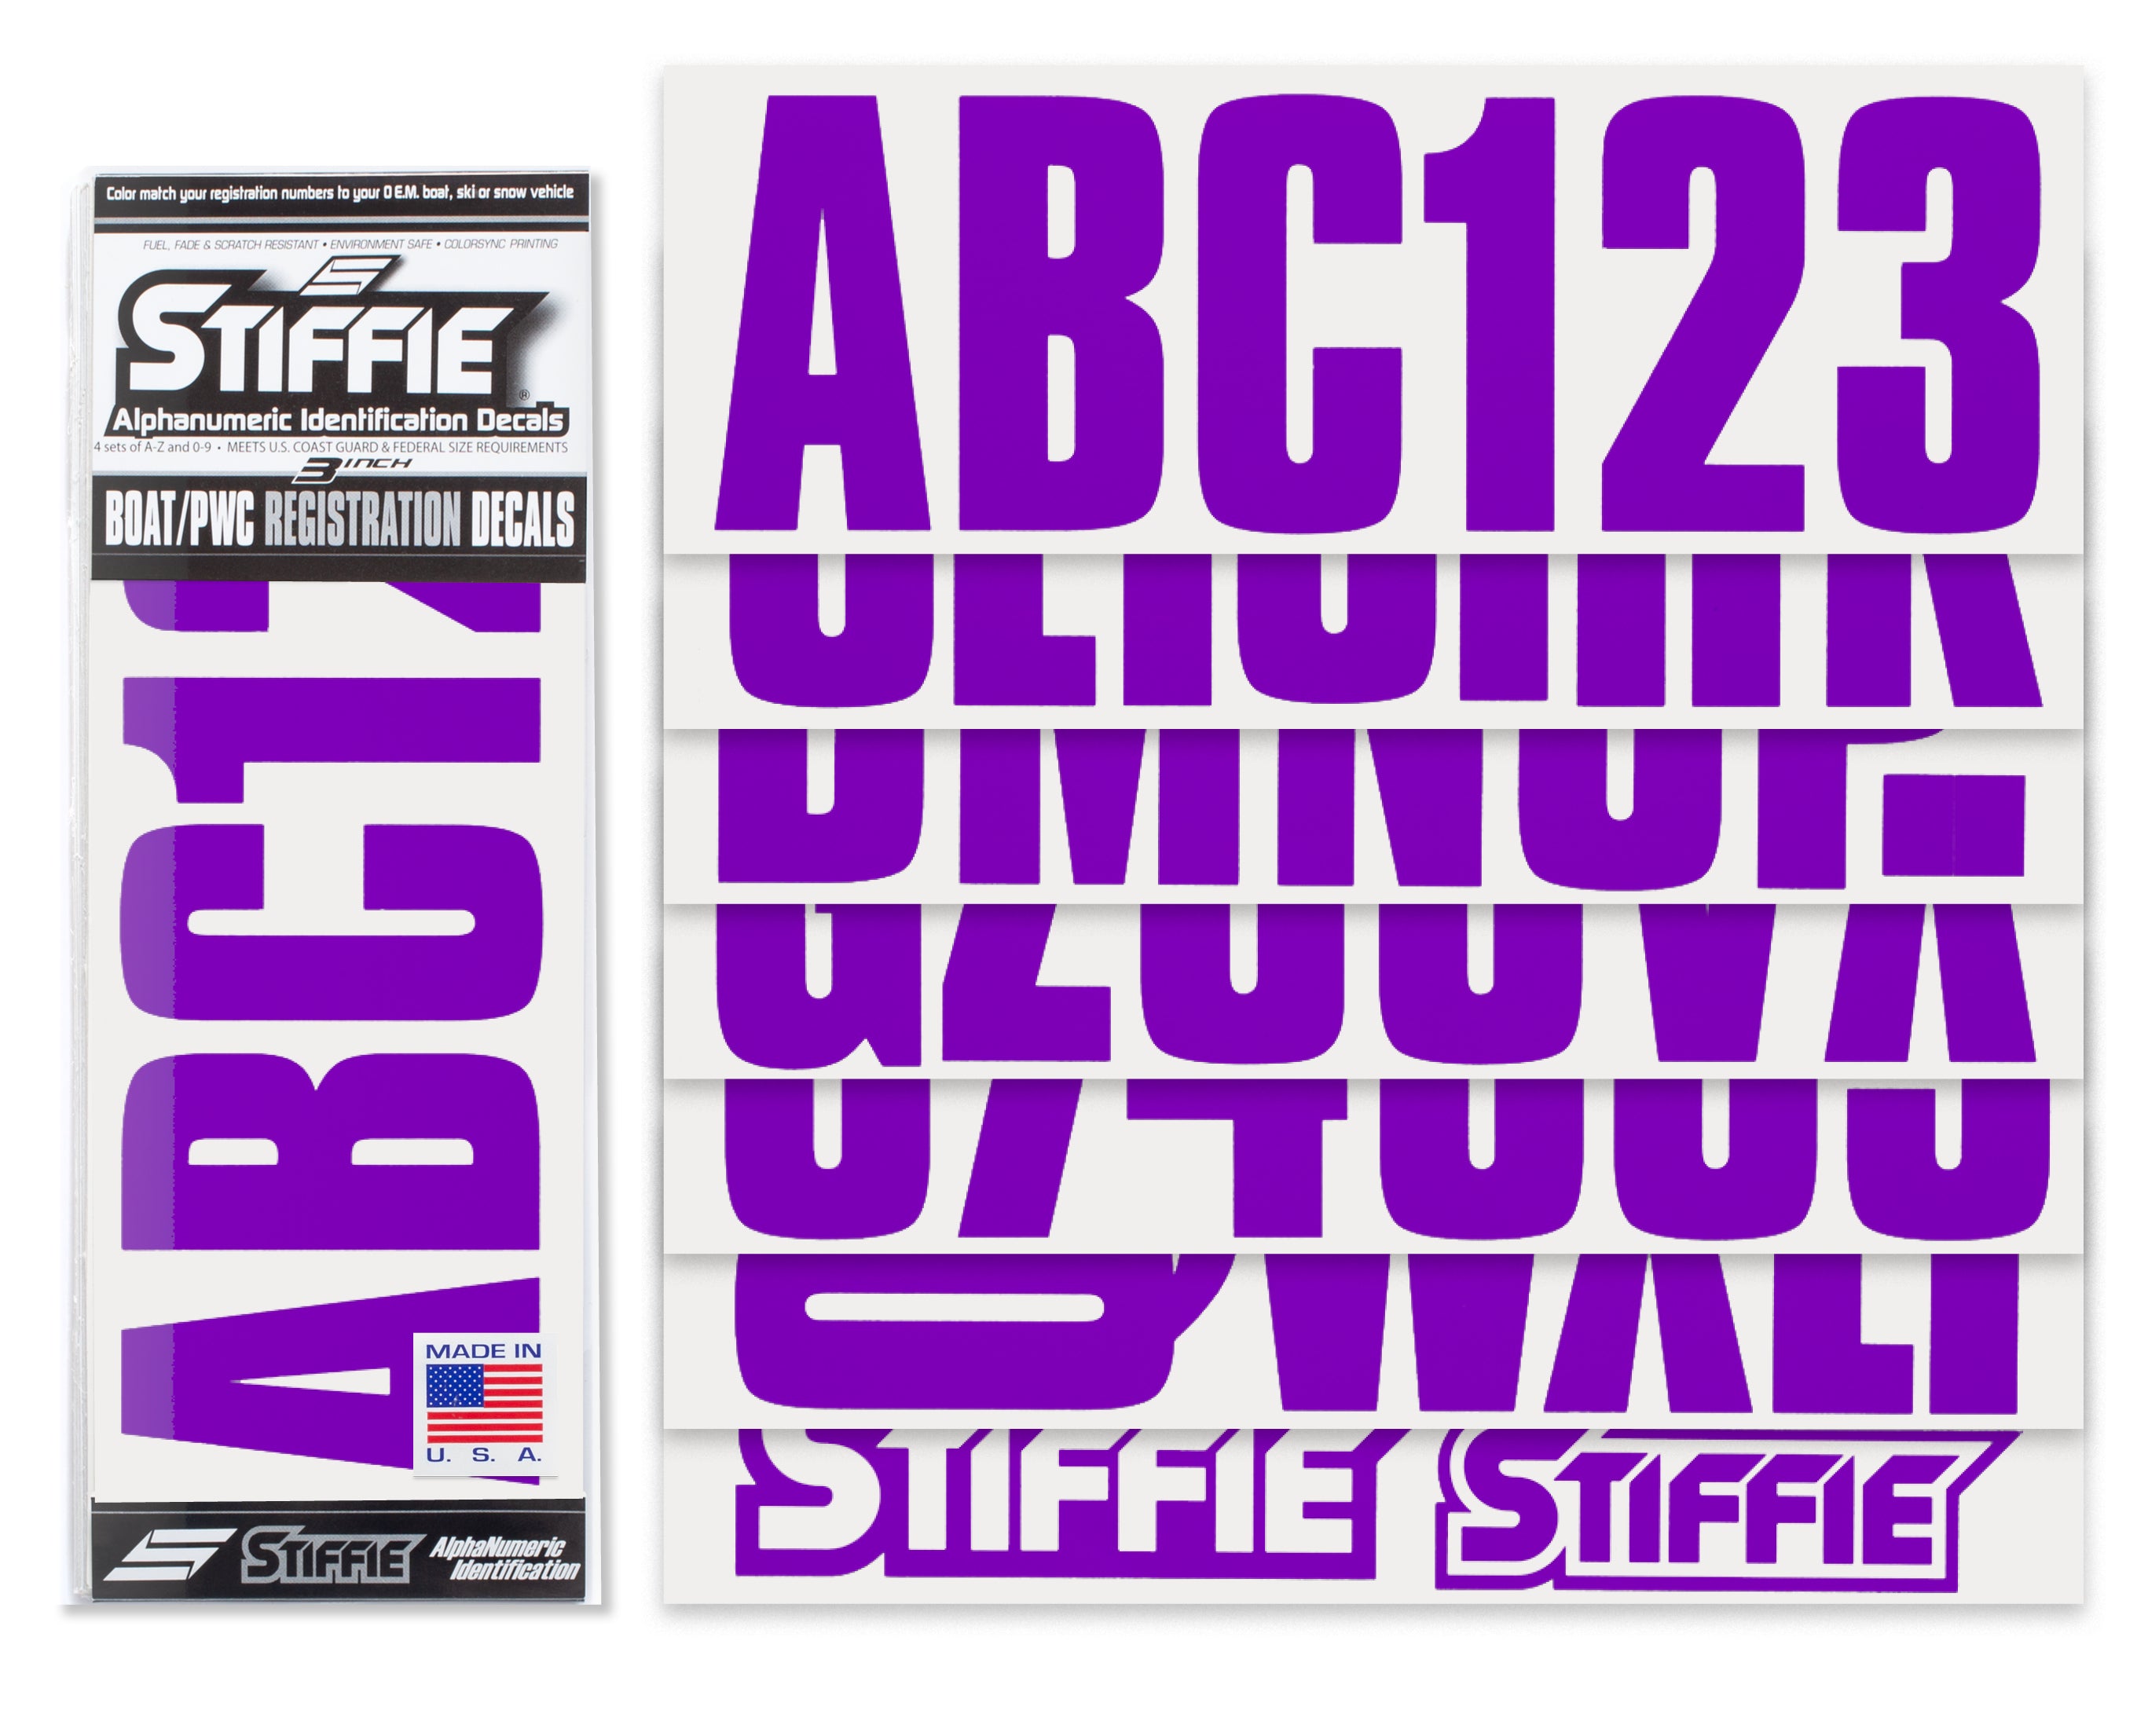 STIFFIE Uniline Purple 3" ID Kit Alpha-Numeric Registration Identification Numbers Stickers Decals for Boats & Personal Watercraft